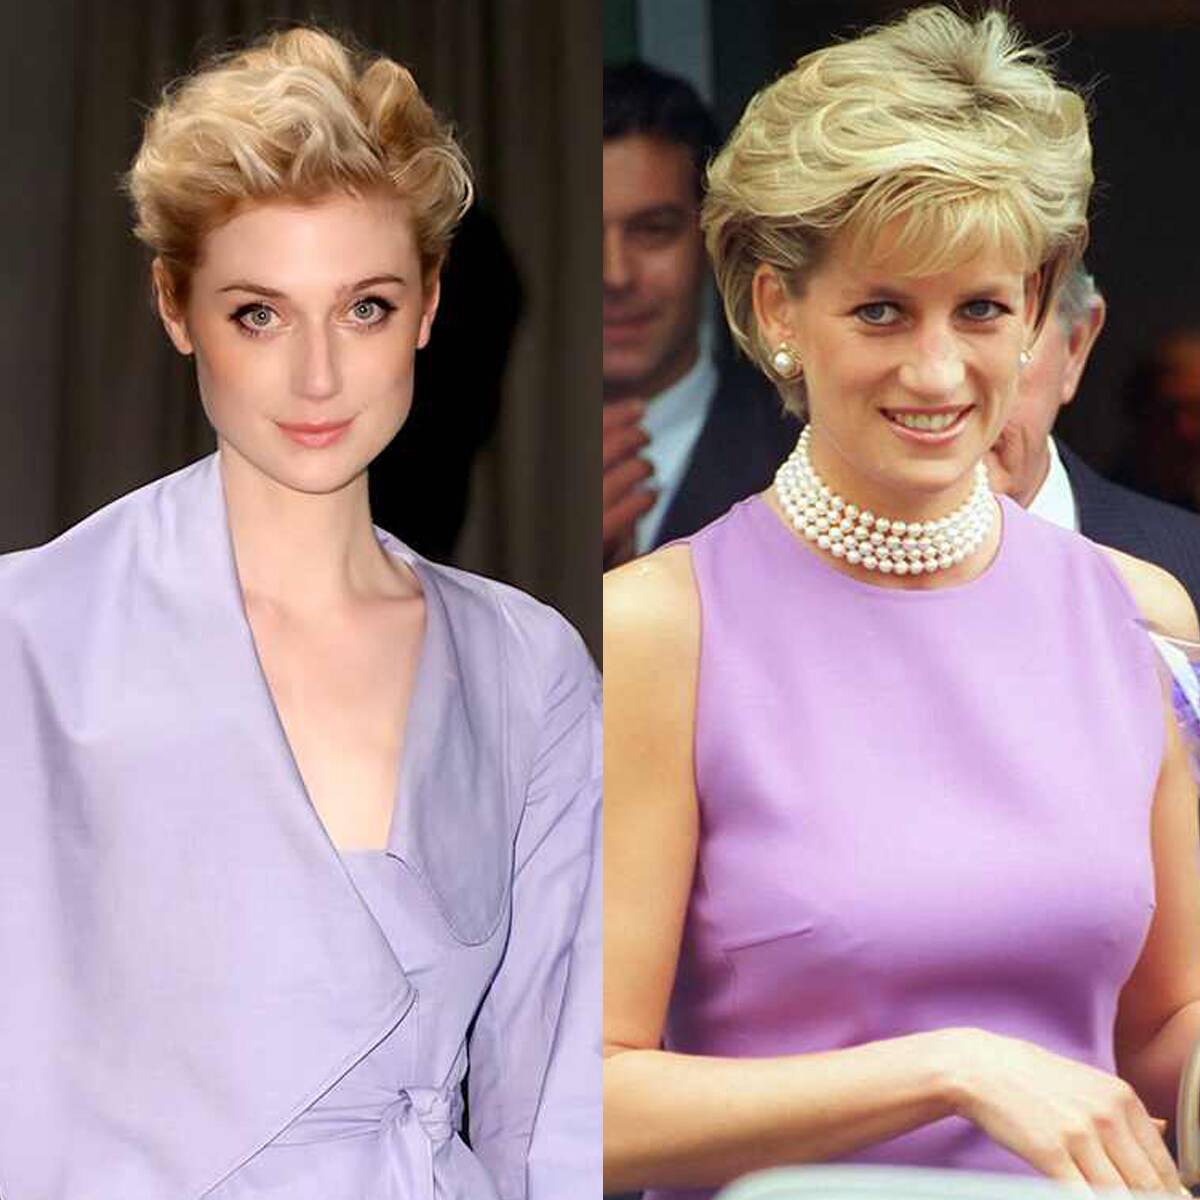 Blink & You'll Miss the First Glimpse of Elizabeth Debicki as Princess Diana in The Crown